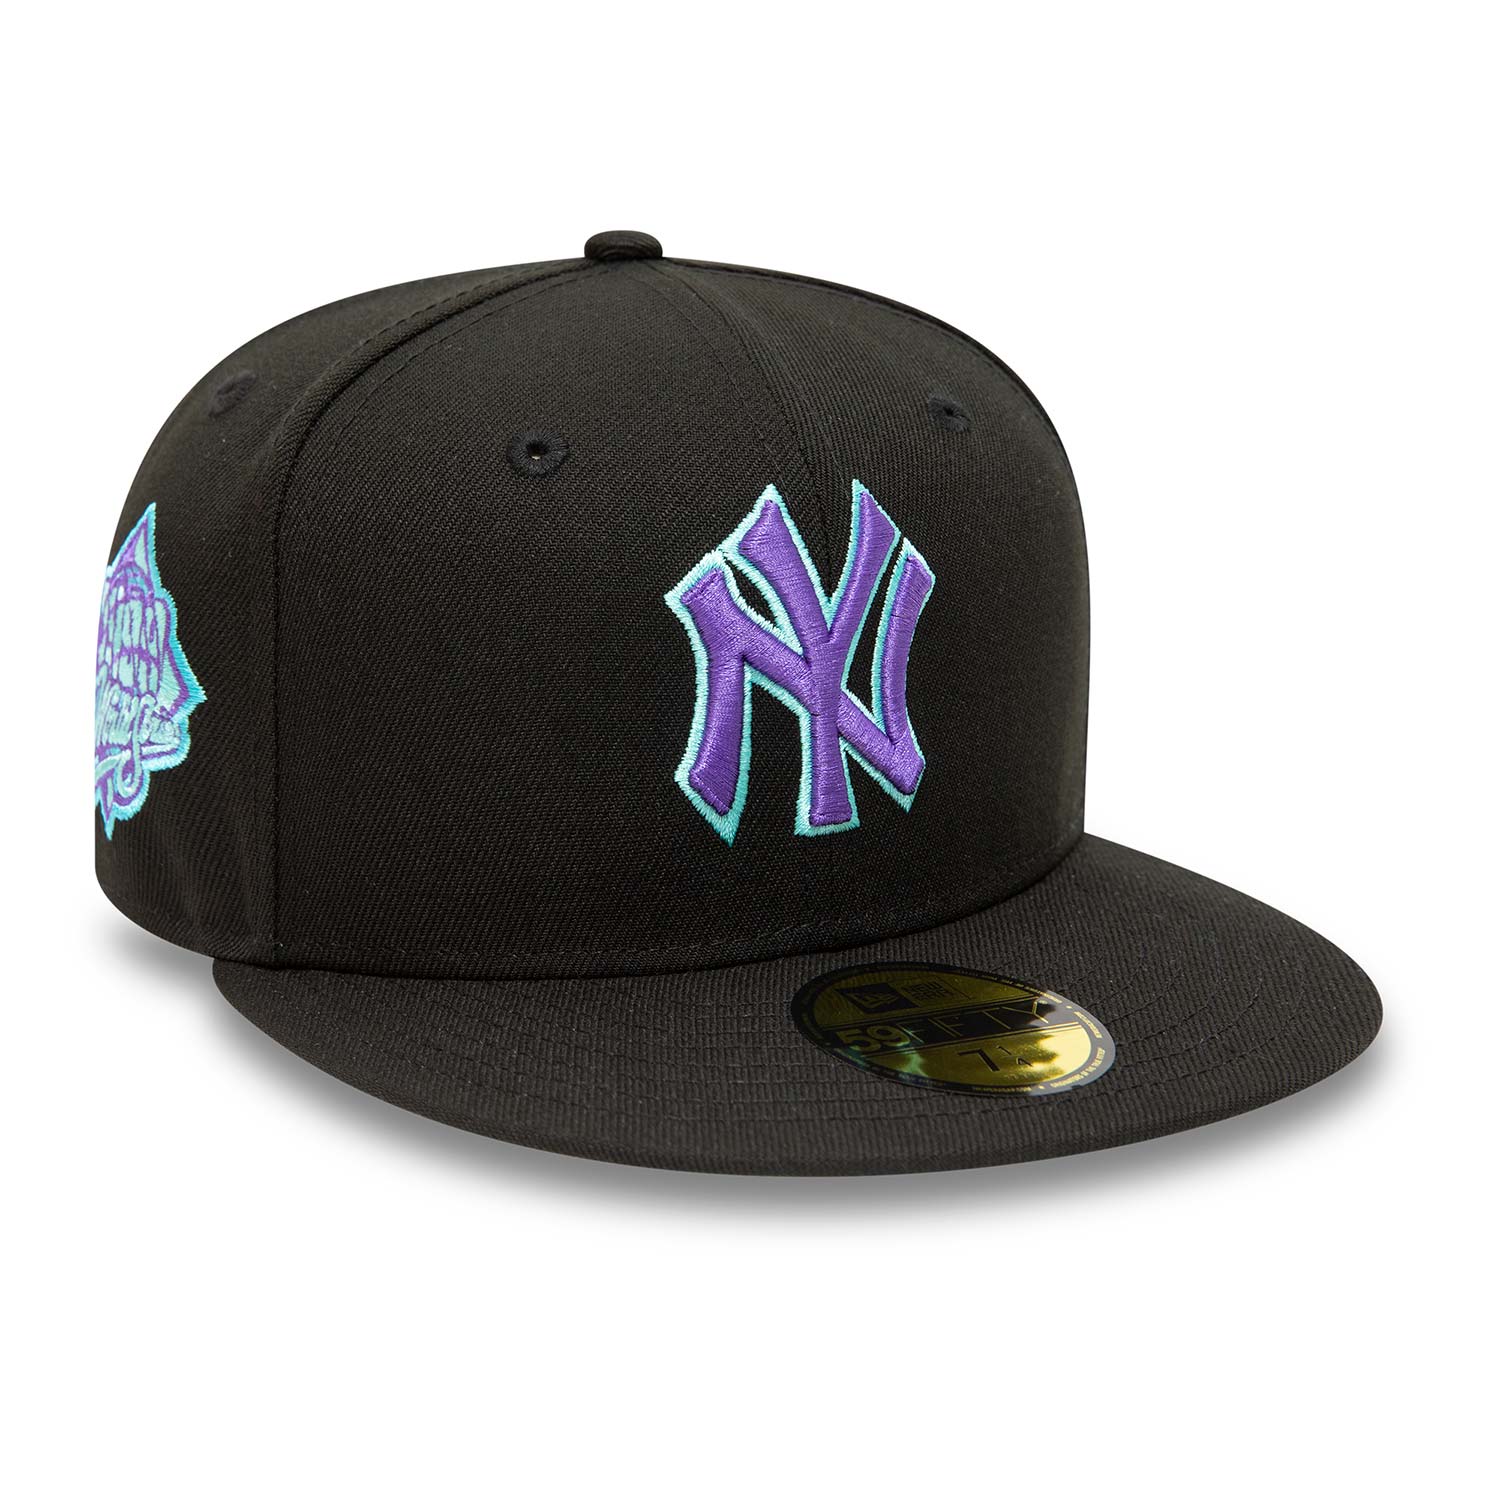 Official New Era New York Yankees Black 59FIFTY Fitted Cap